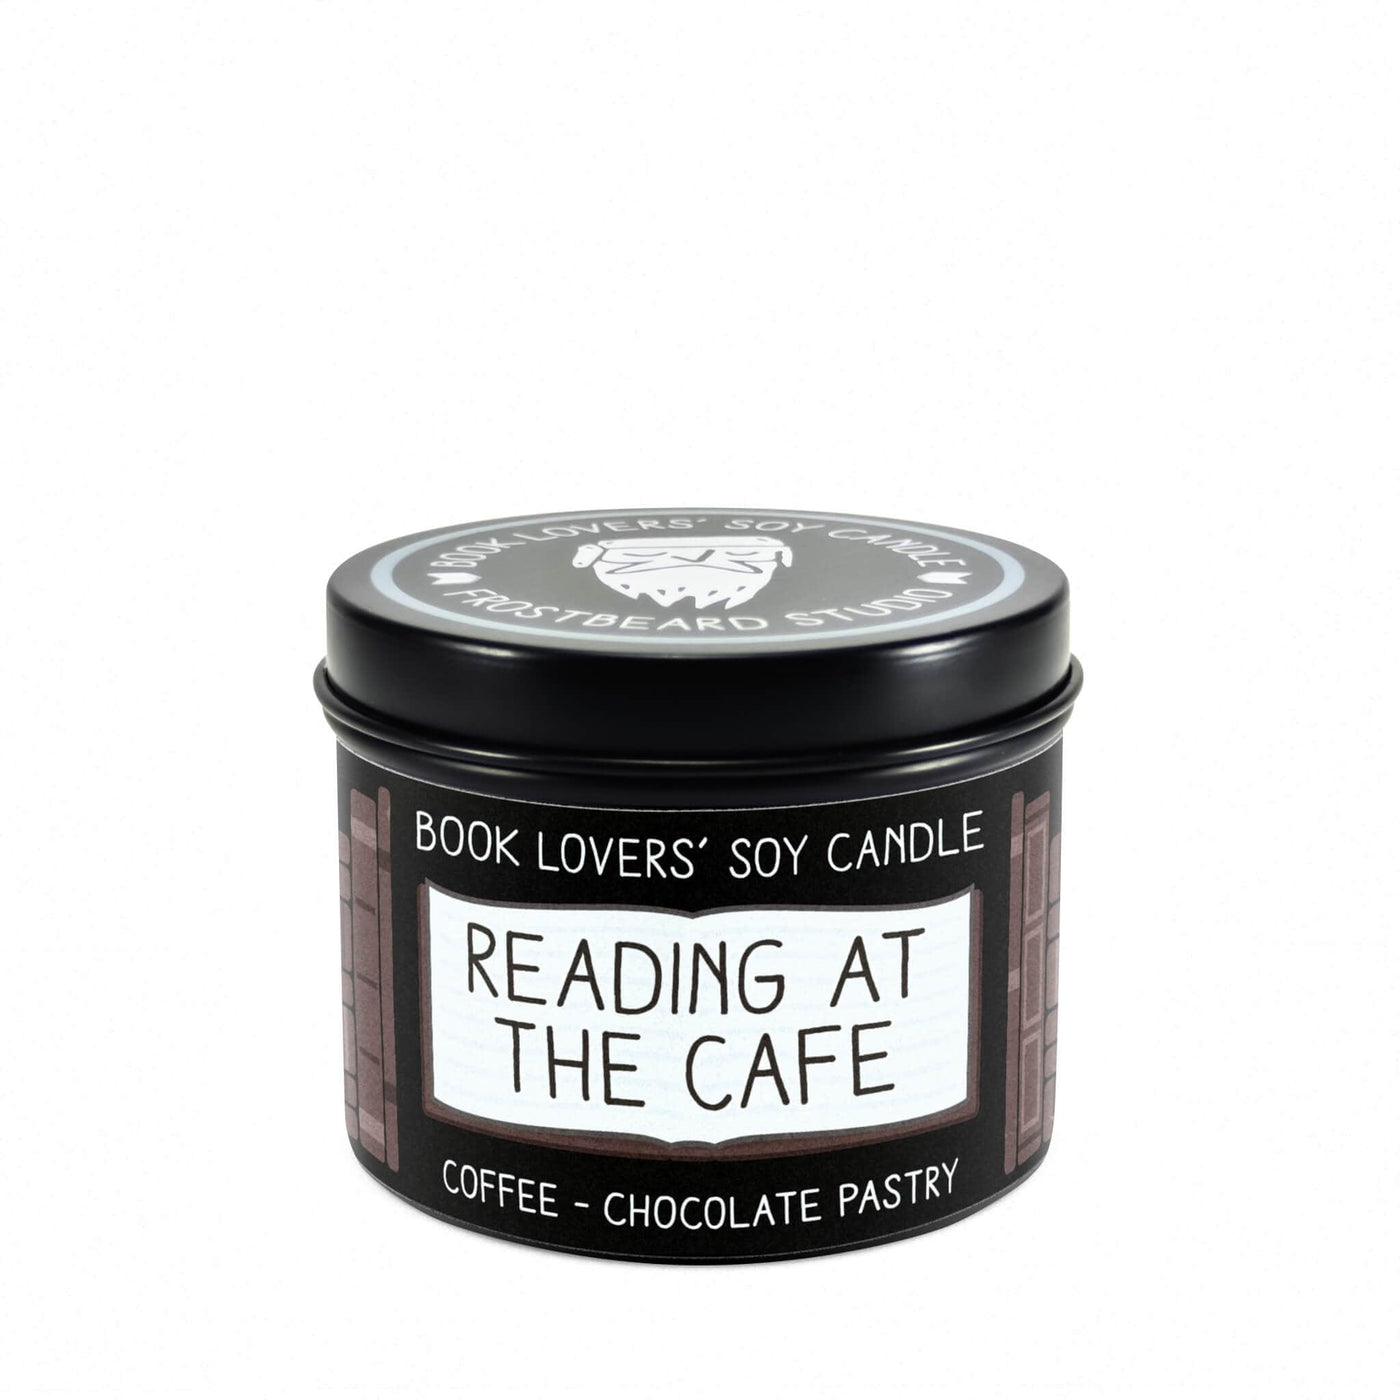 Reading at the Cafe - 4 oz Tin - Book Lovers' Soy Candle - Frostbeard Studio